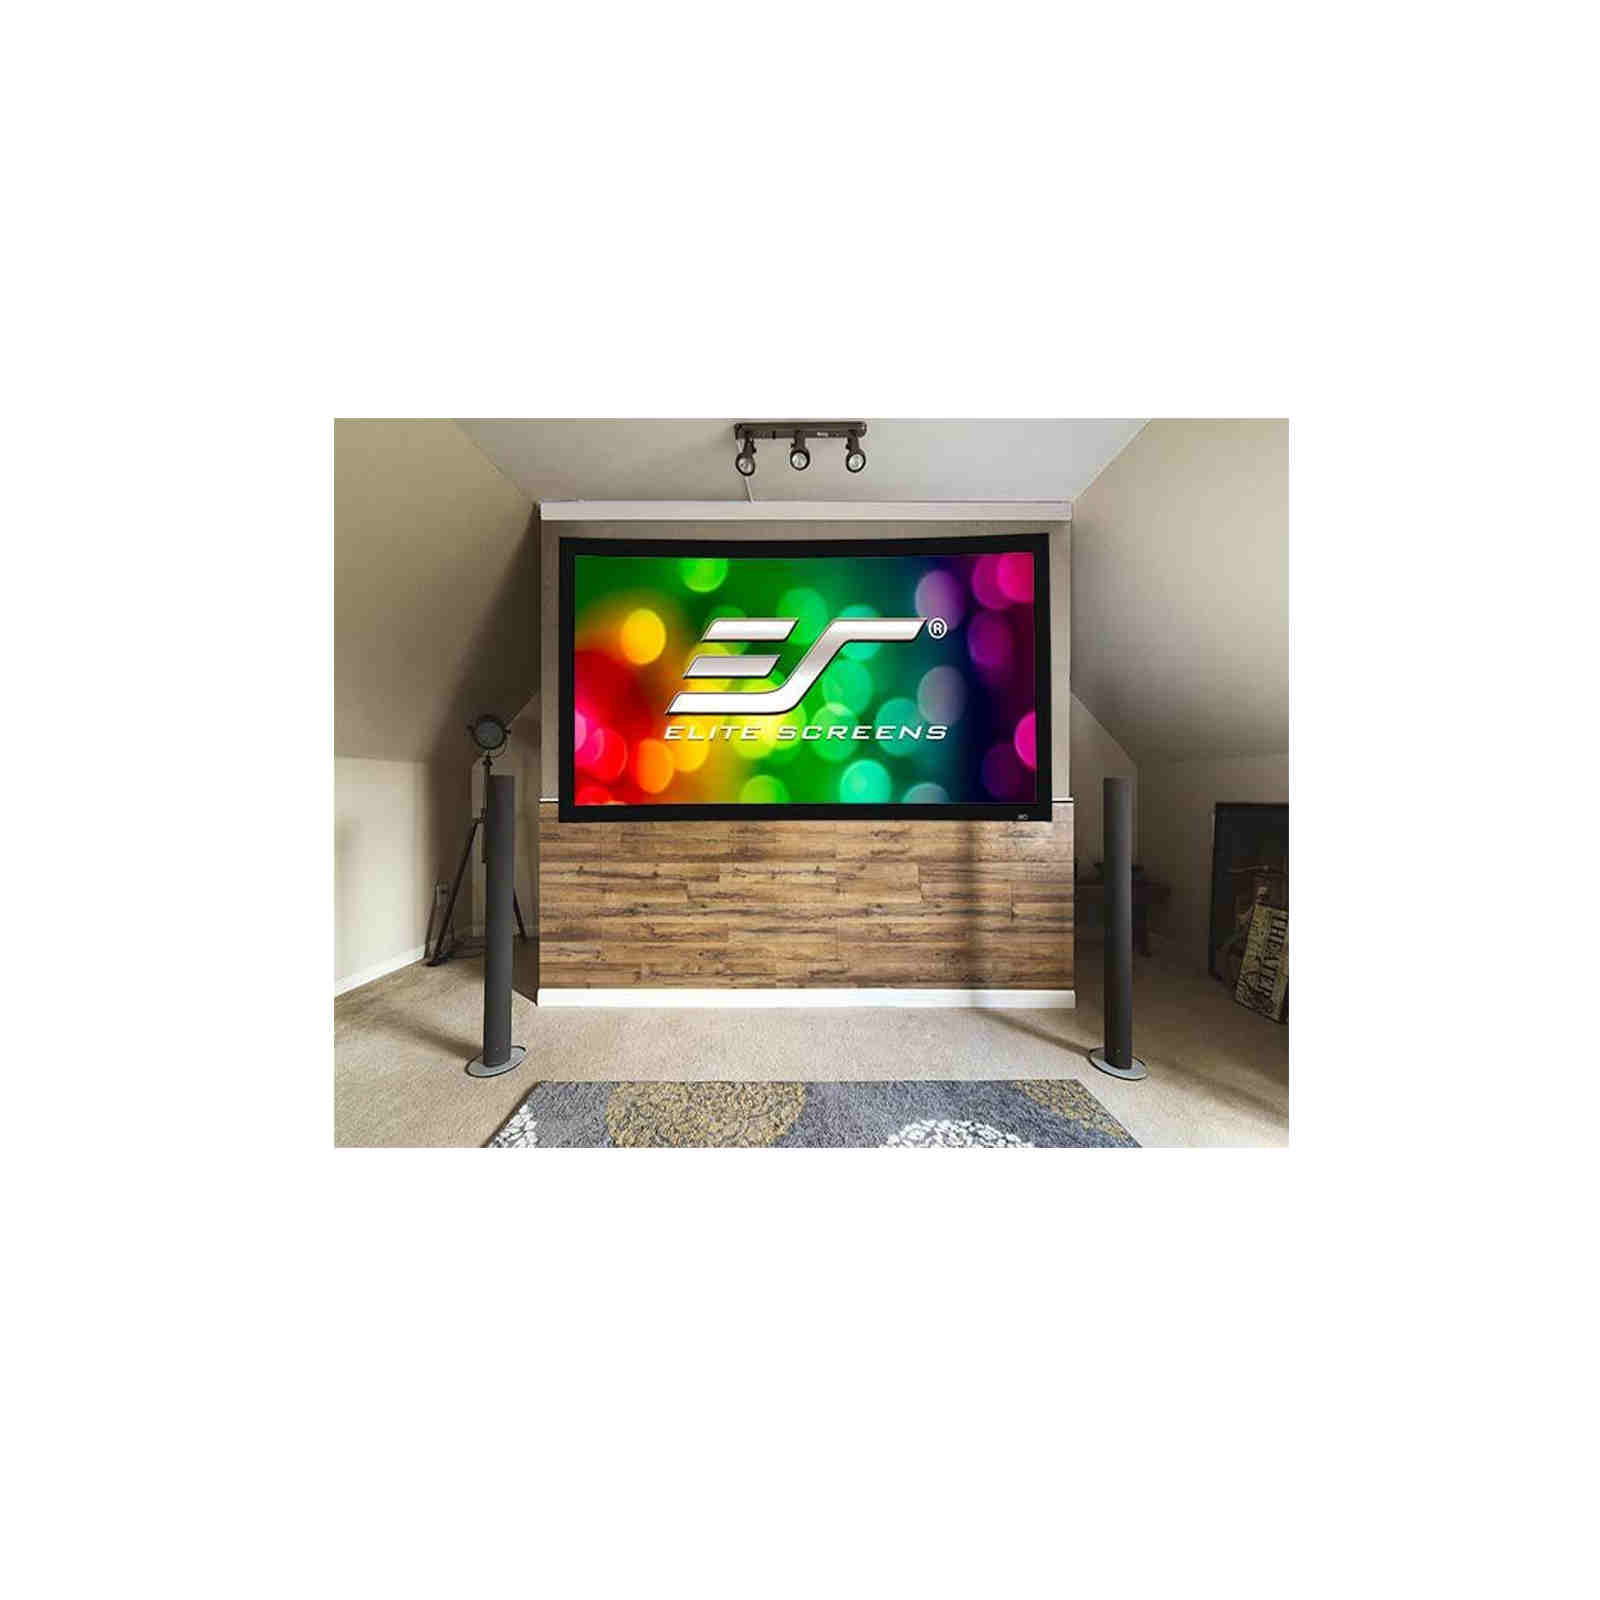 Elite Lunette CineWhite Curved Fixed Frame Projection Screen 110" 16:9 (Curve110WH1) - Ooberpad